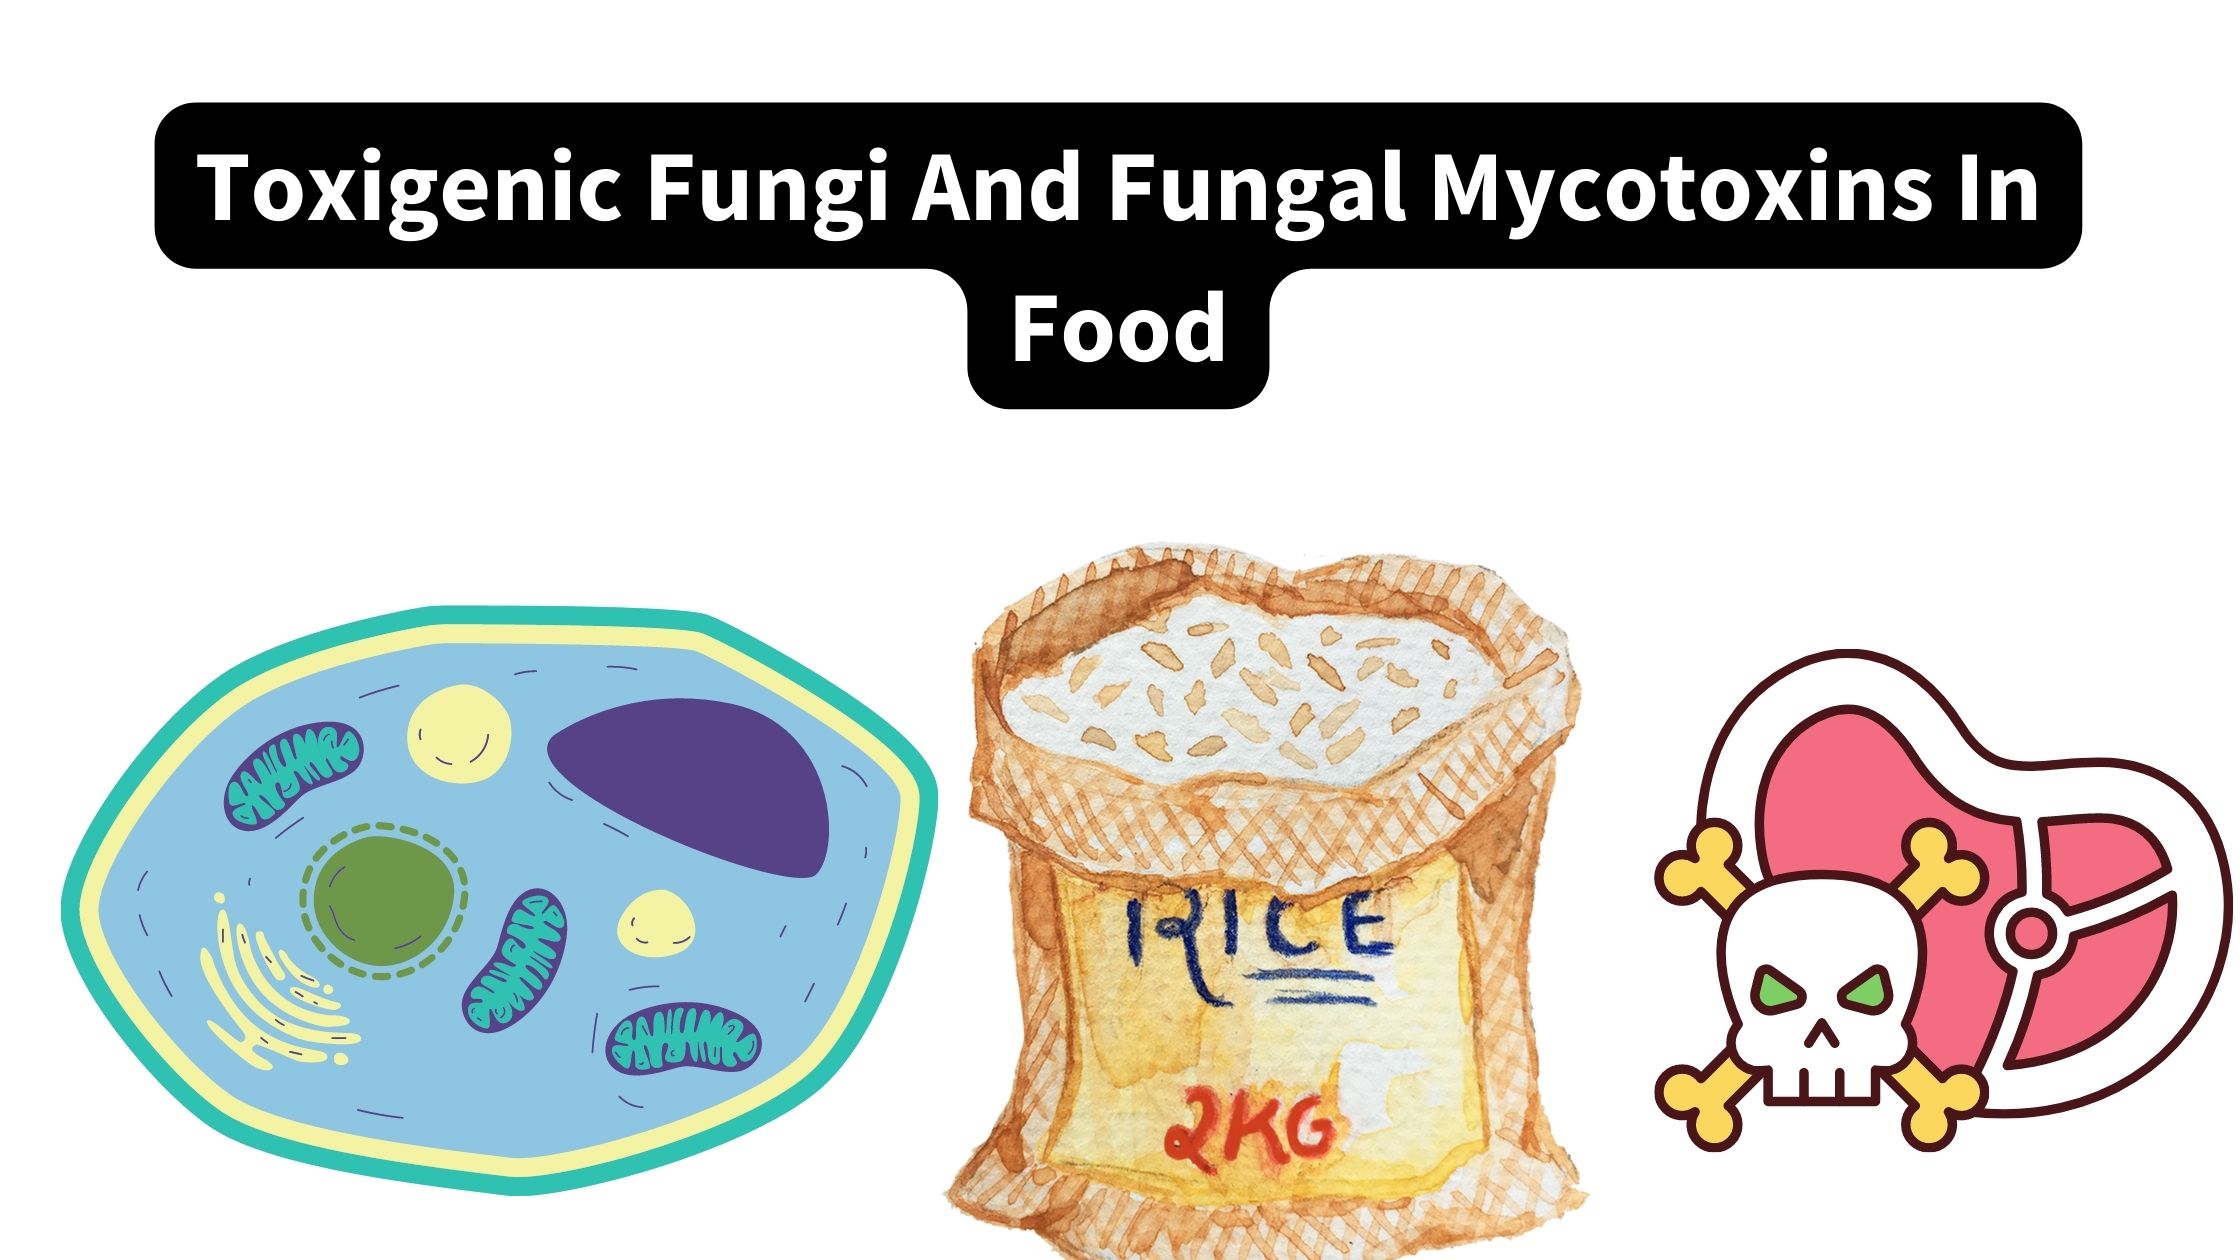 Toxigenic Fungi And Fungal Mycotoxins In Food